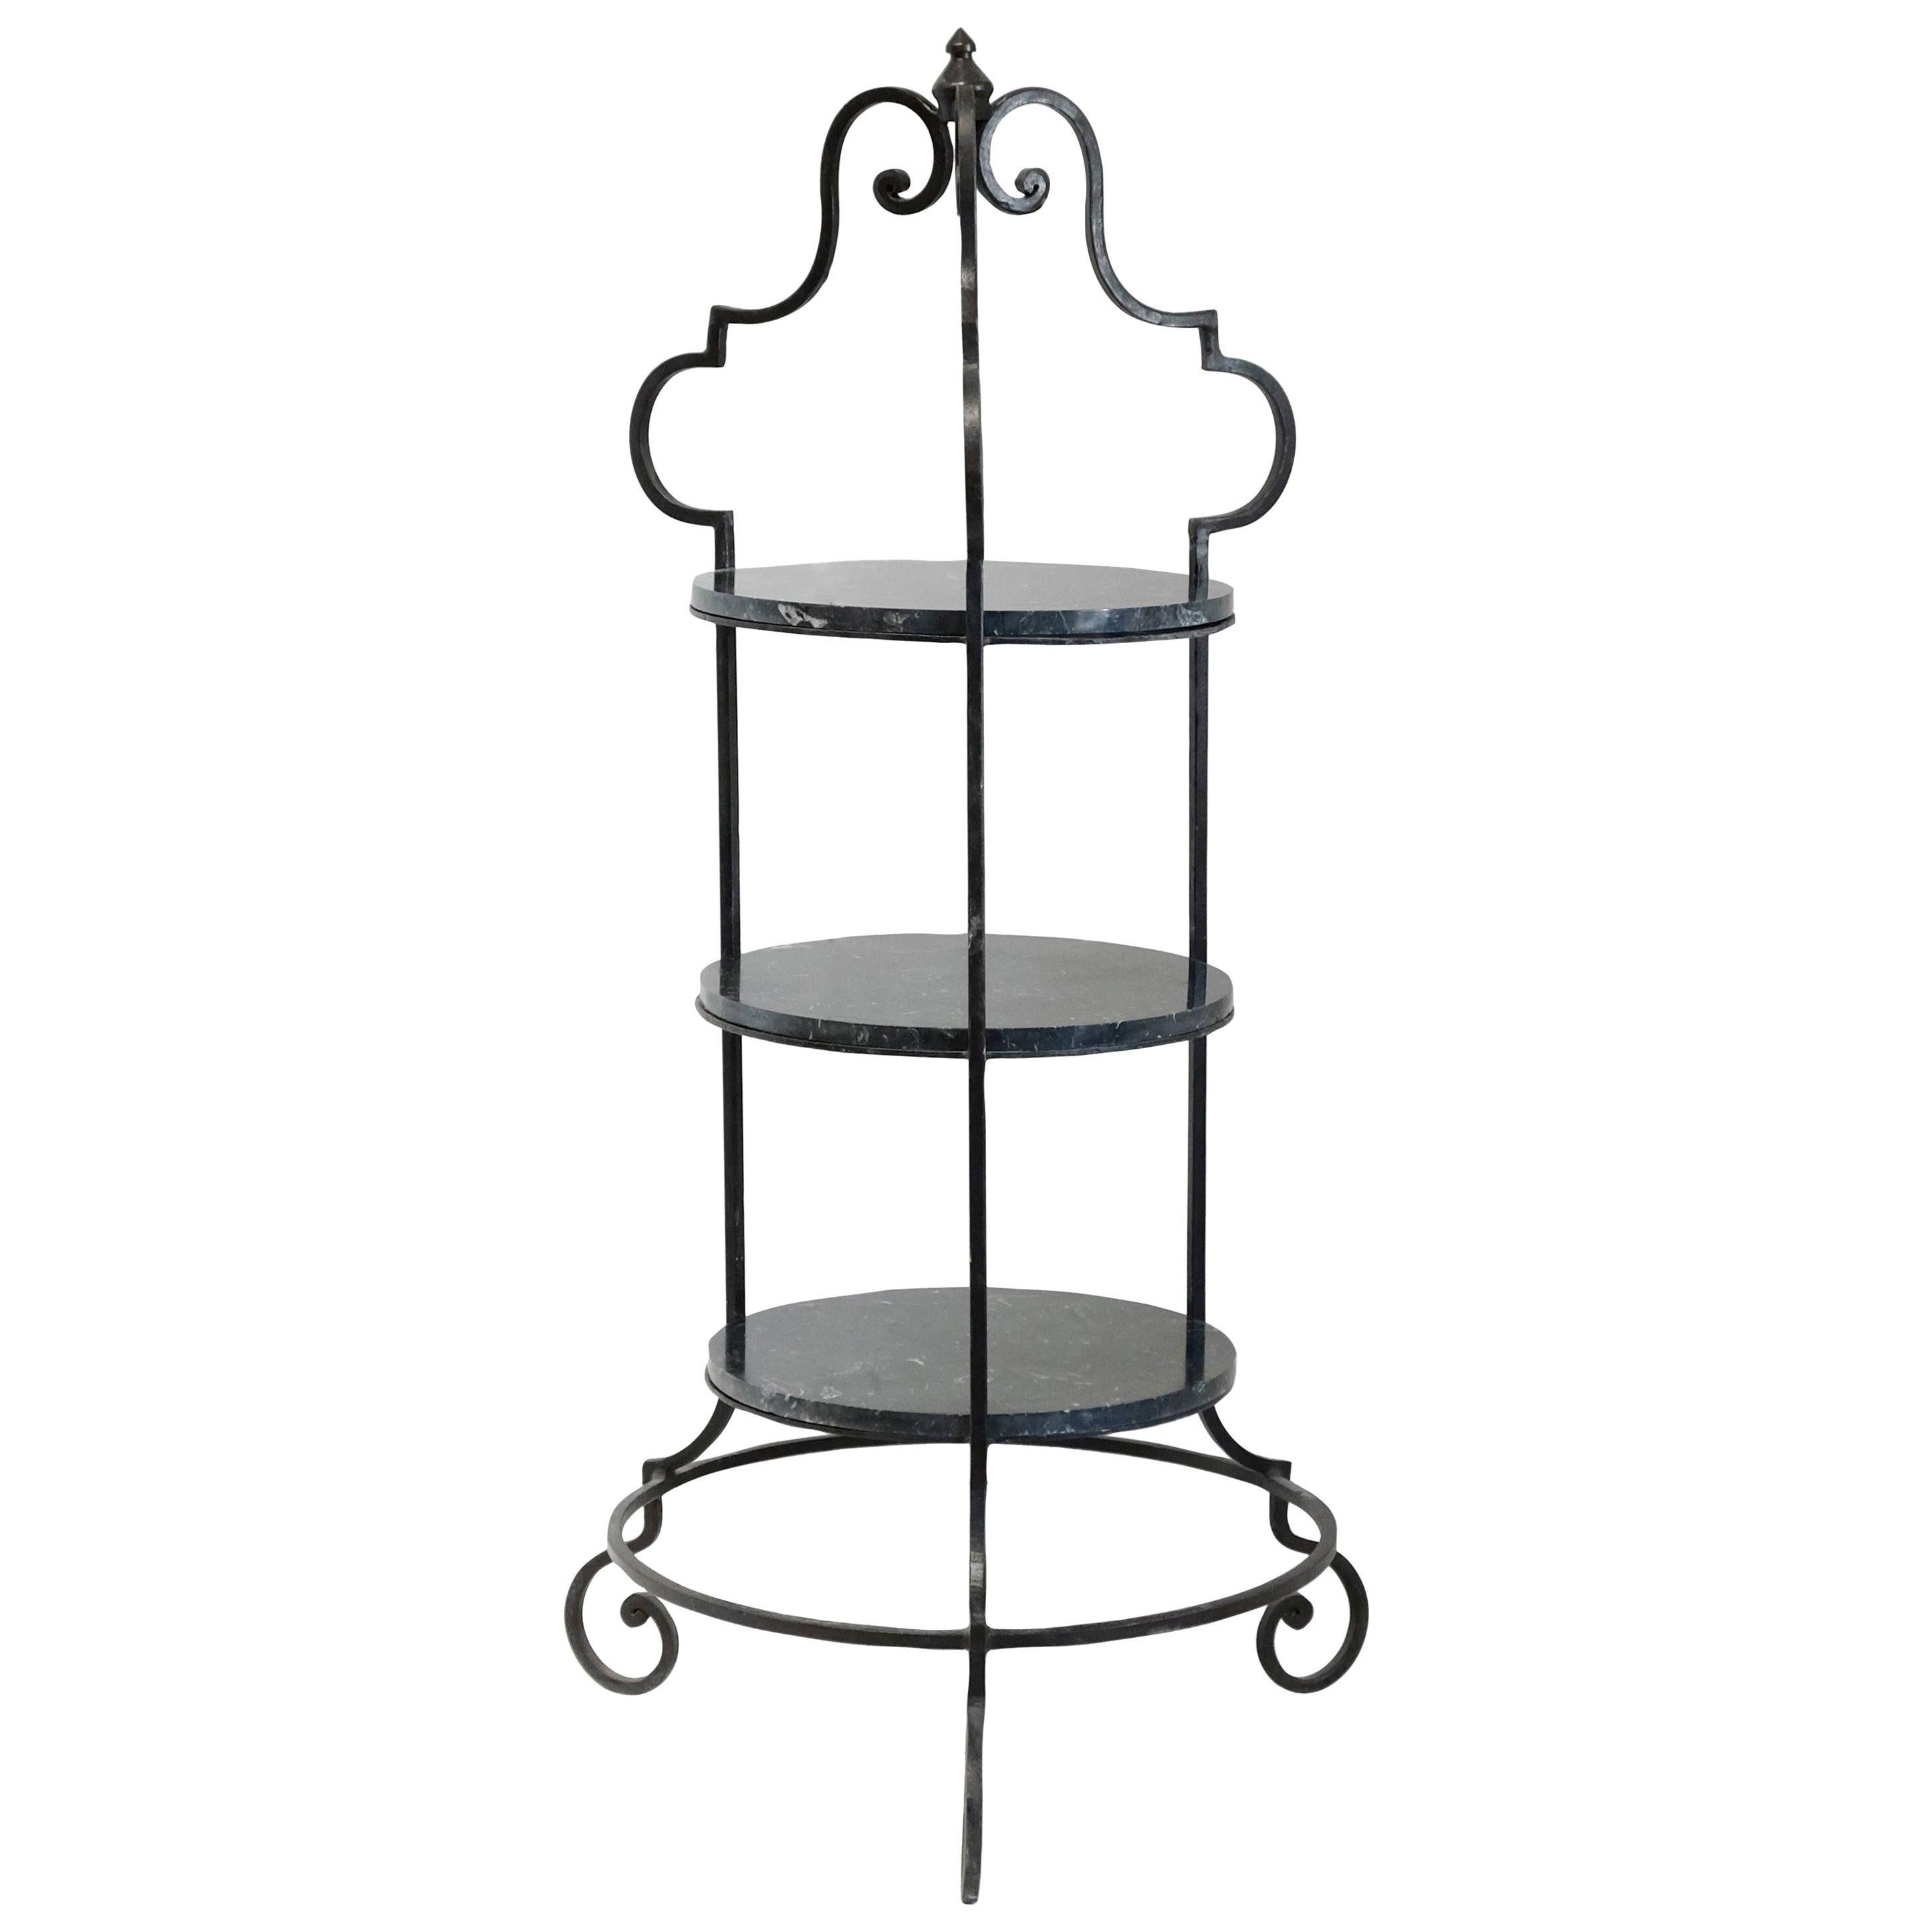 Large Wrought Iron Marble Pâtisserie Stand Ornate Floor Standing French Outdoor For Sale